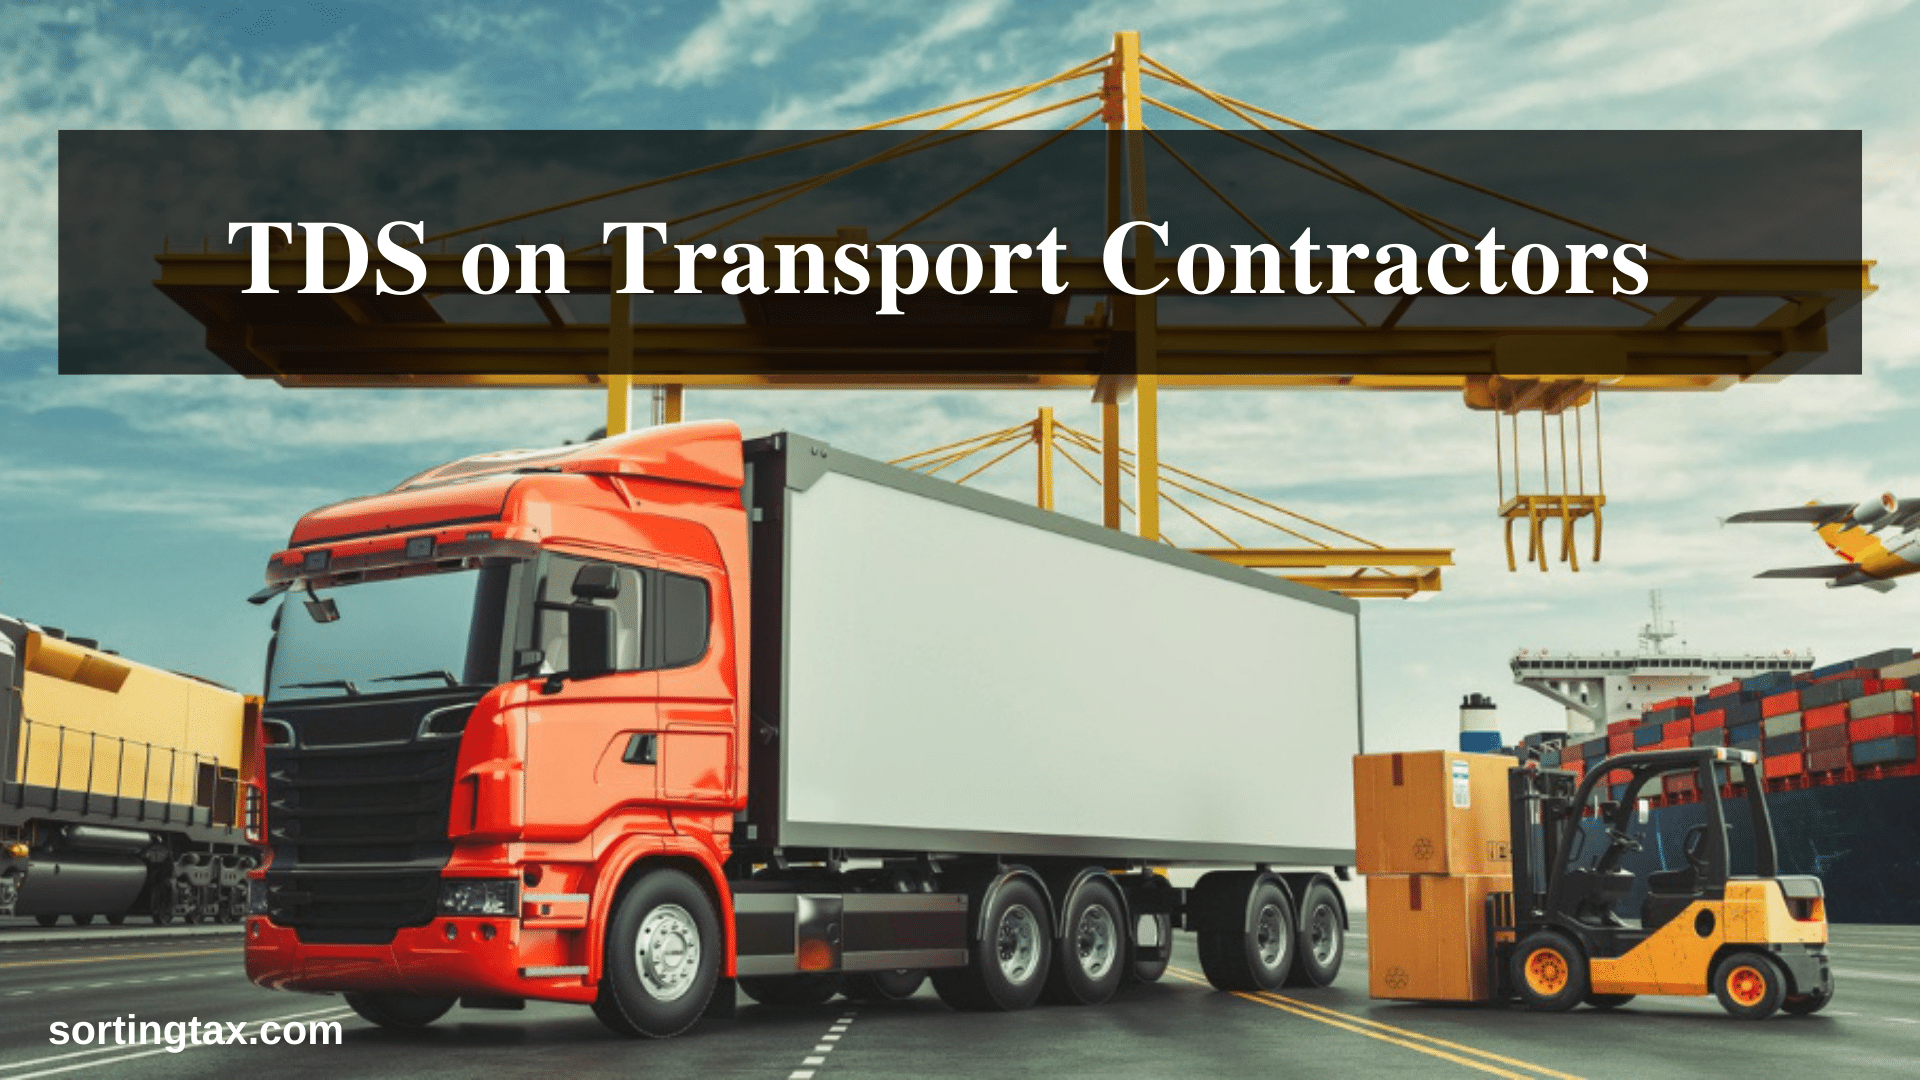 TDS on transport contractors - Section 194C